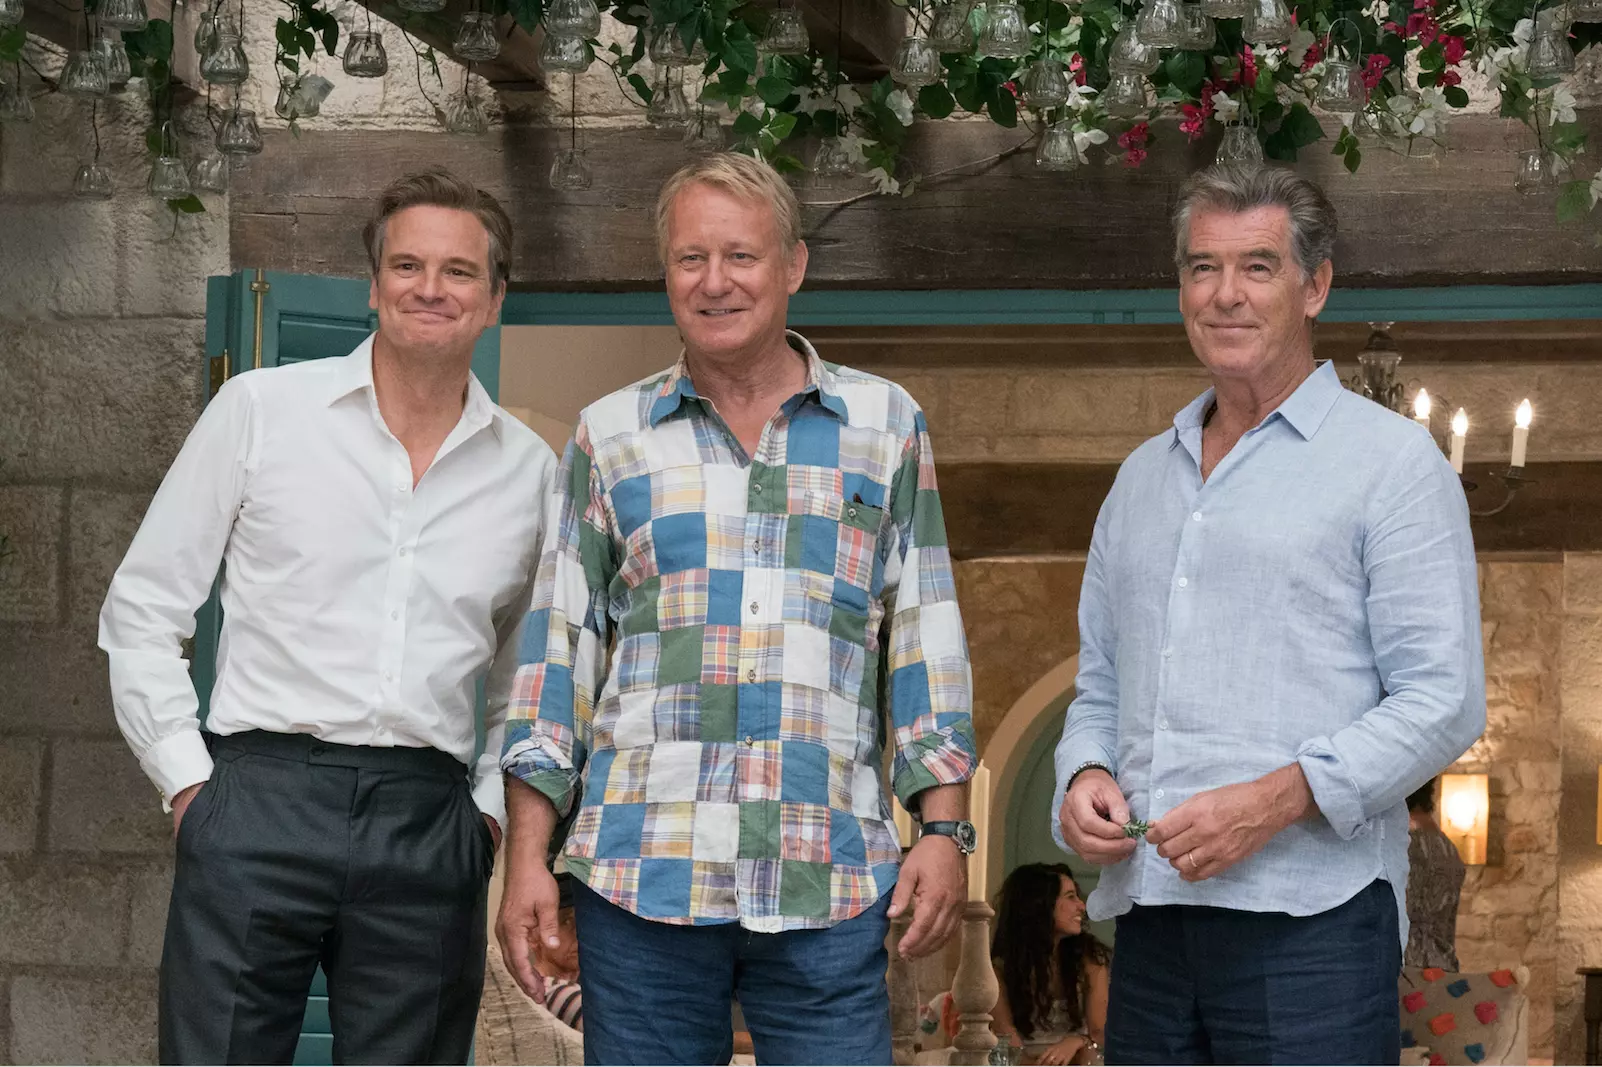 Mamma Mia 2' Review: Not as Fun, But How Can You Resist It?